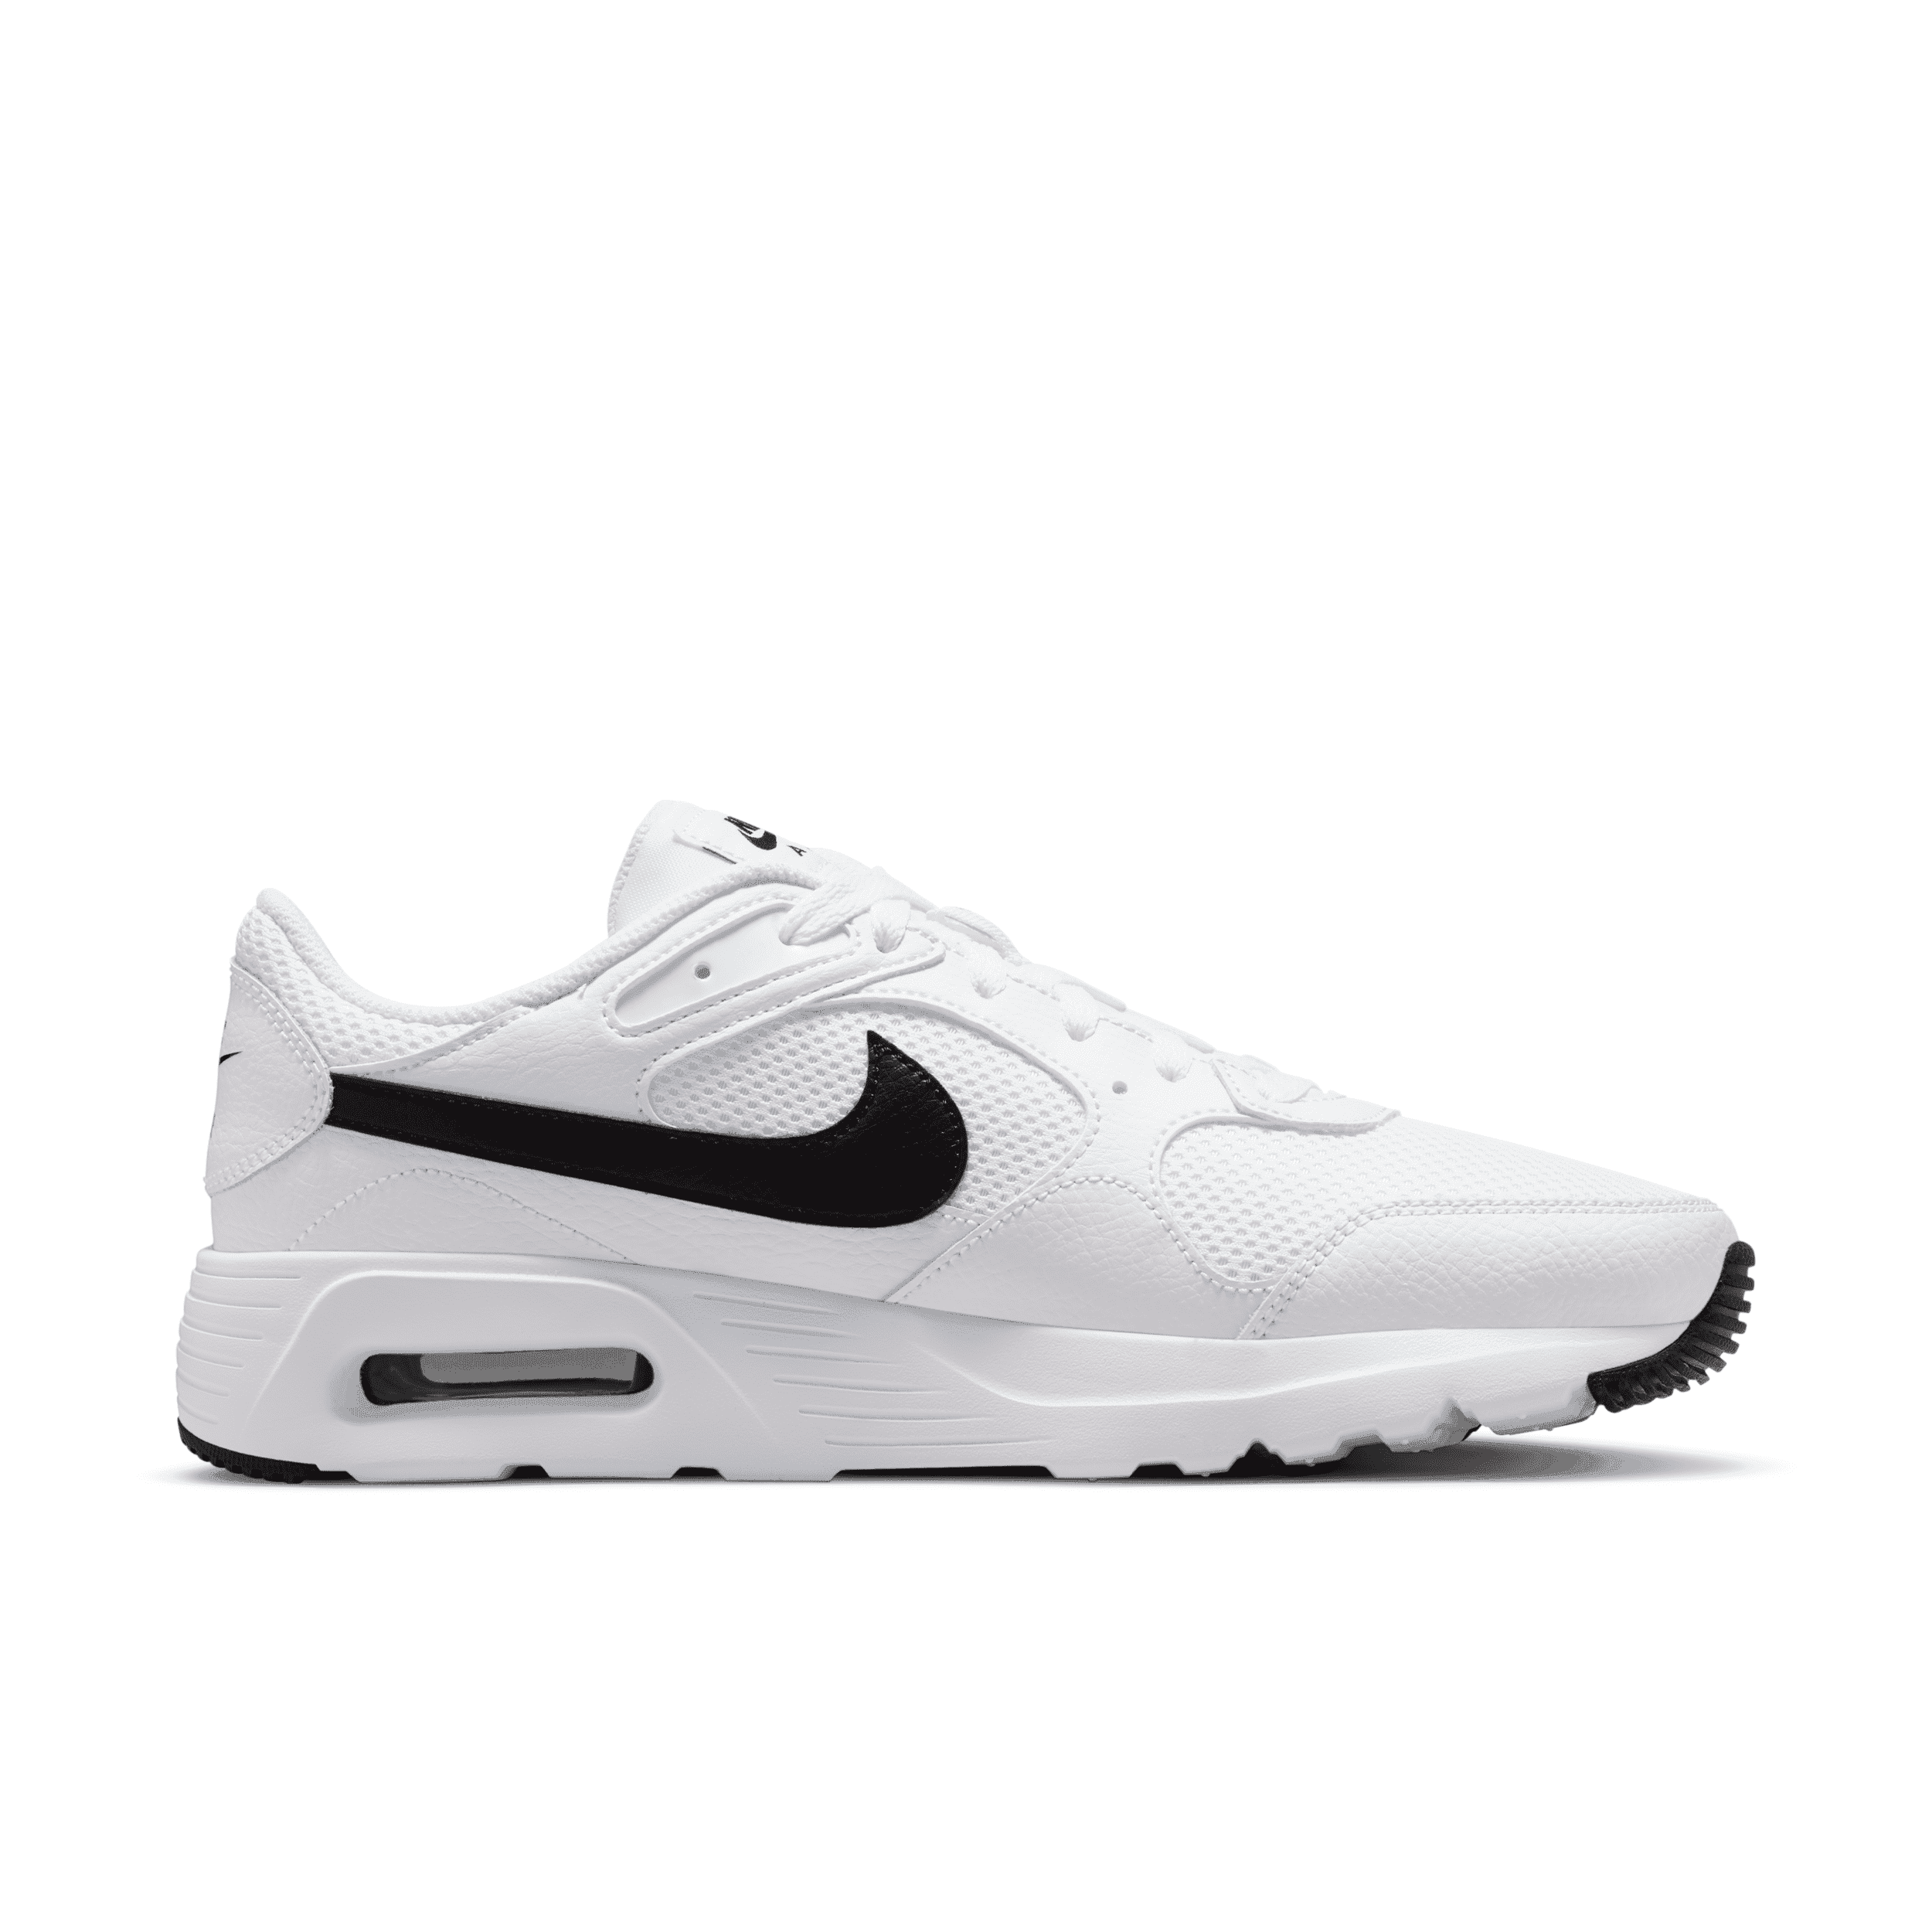 Raffles Air - SC Max White Date Release Black Nike CW4555-102 and